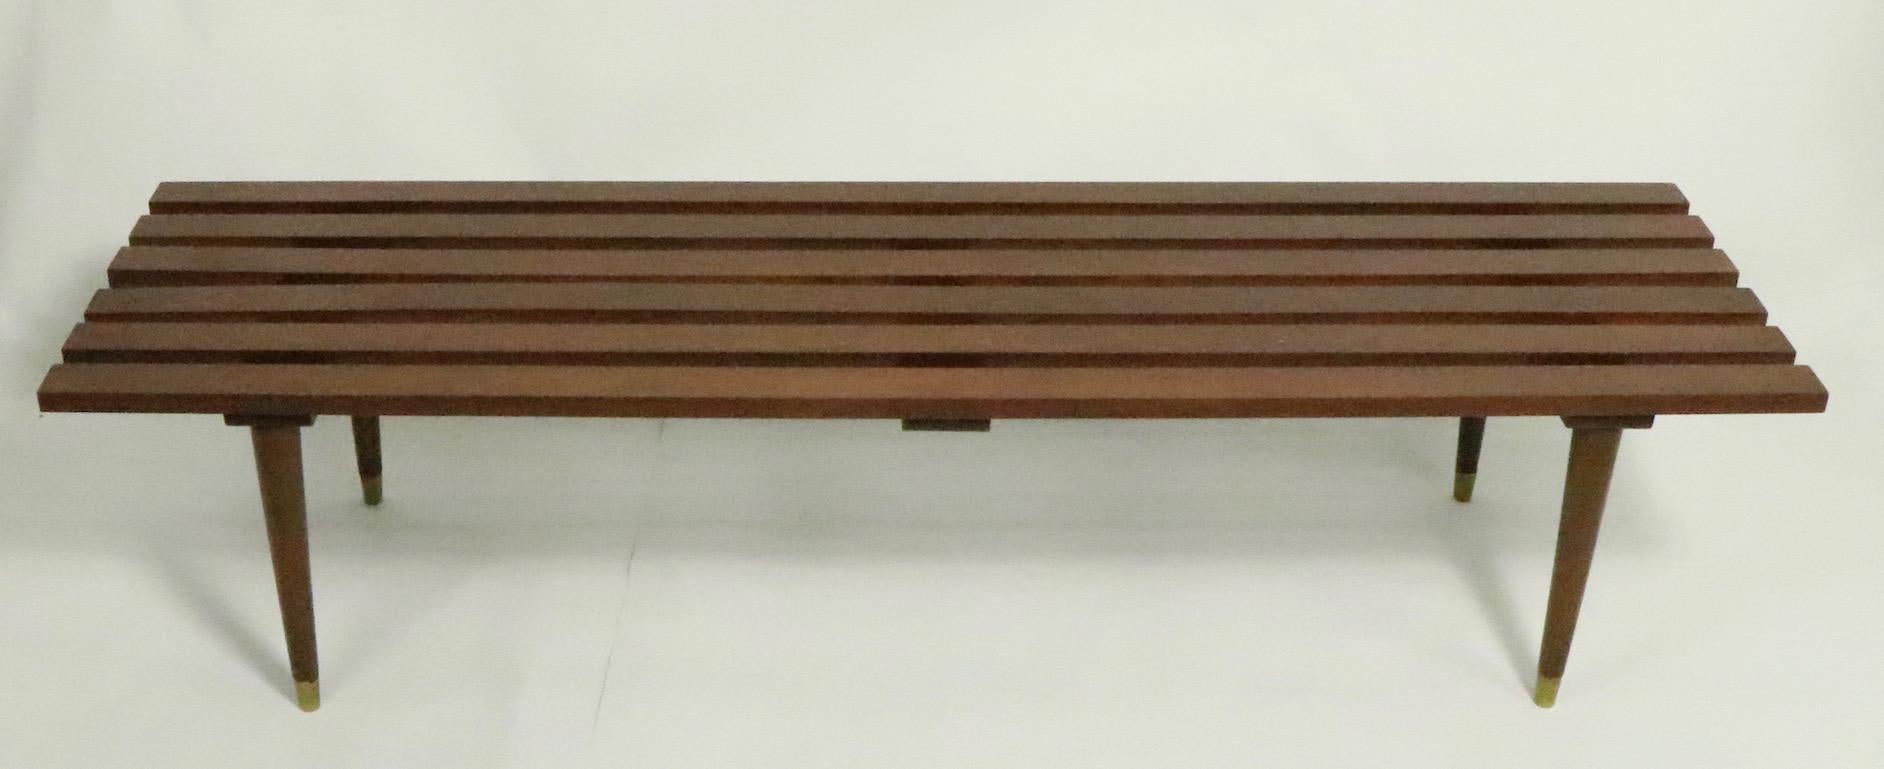 Classic midcentury slat bench, coffee table. In very good, original condition, clean and ready to use.